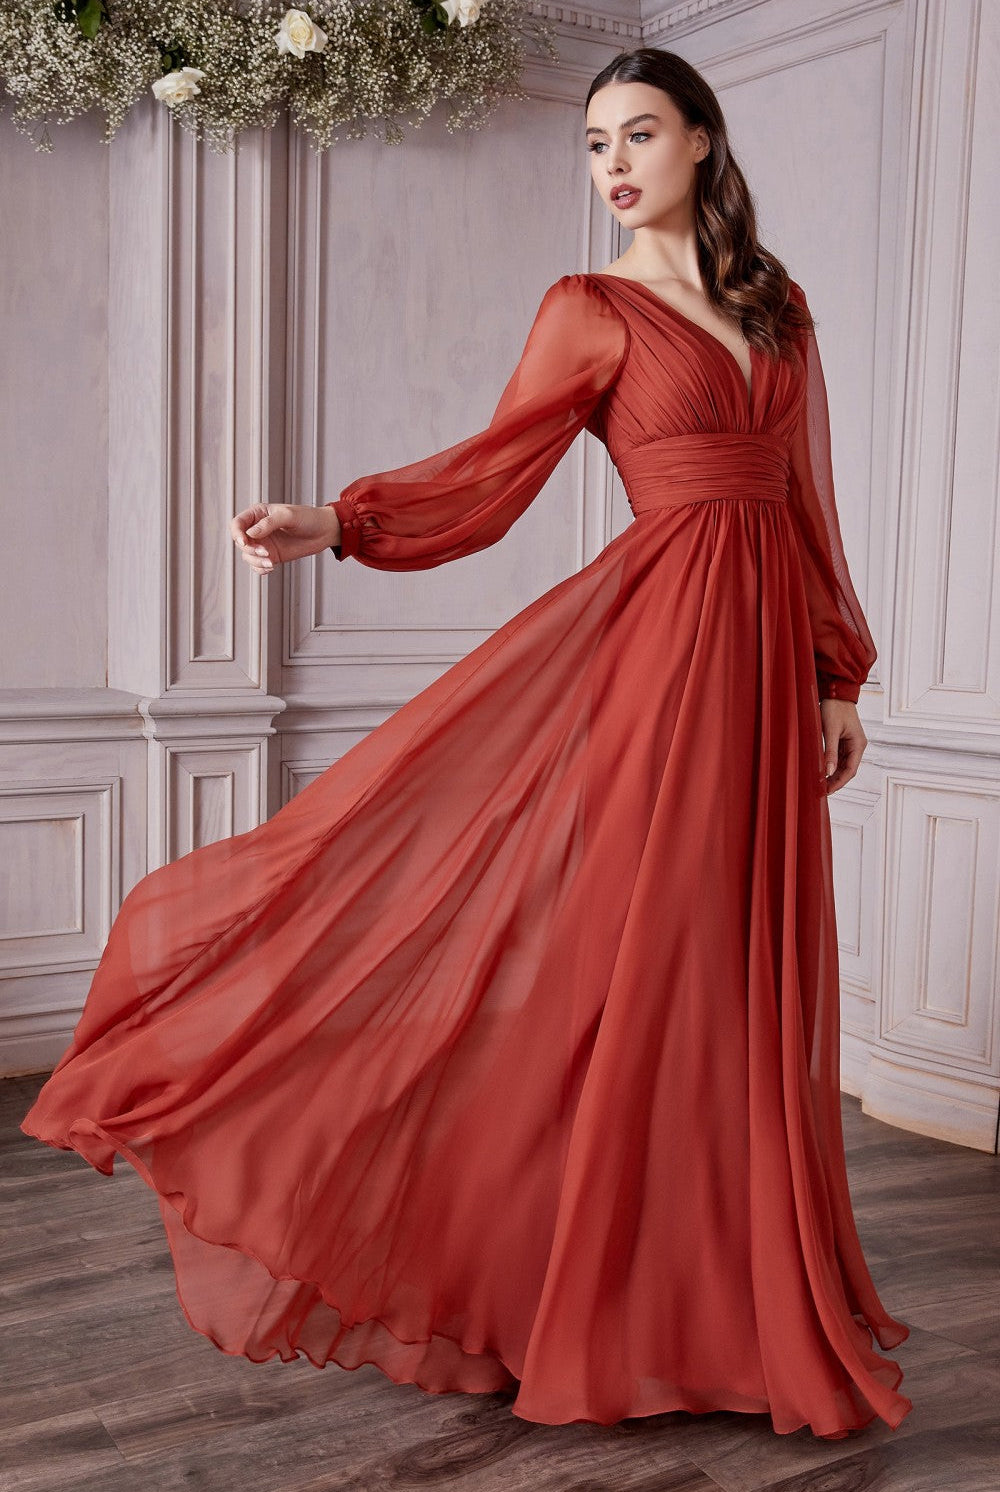 Long Sleeve Chiffon Prom & Ball Dress Modest Gown Gathered Fitted Bodice Sensual Open Back A-line Silhouette CDCD0192 Sale-Prom Dress-smcfashion.com